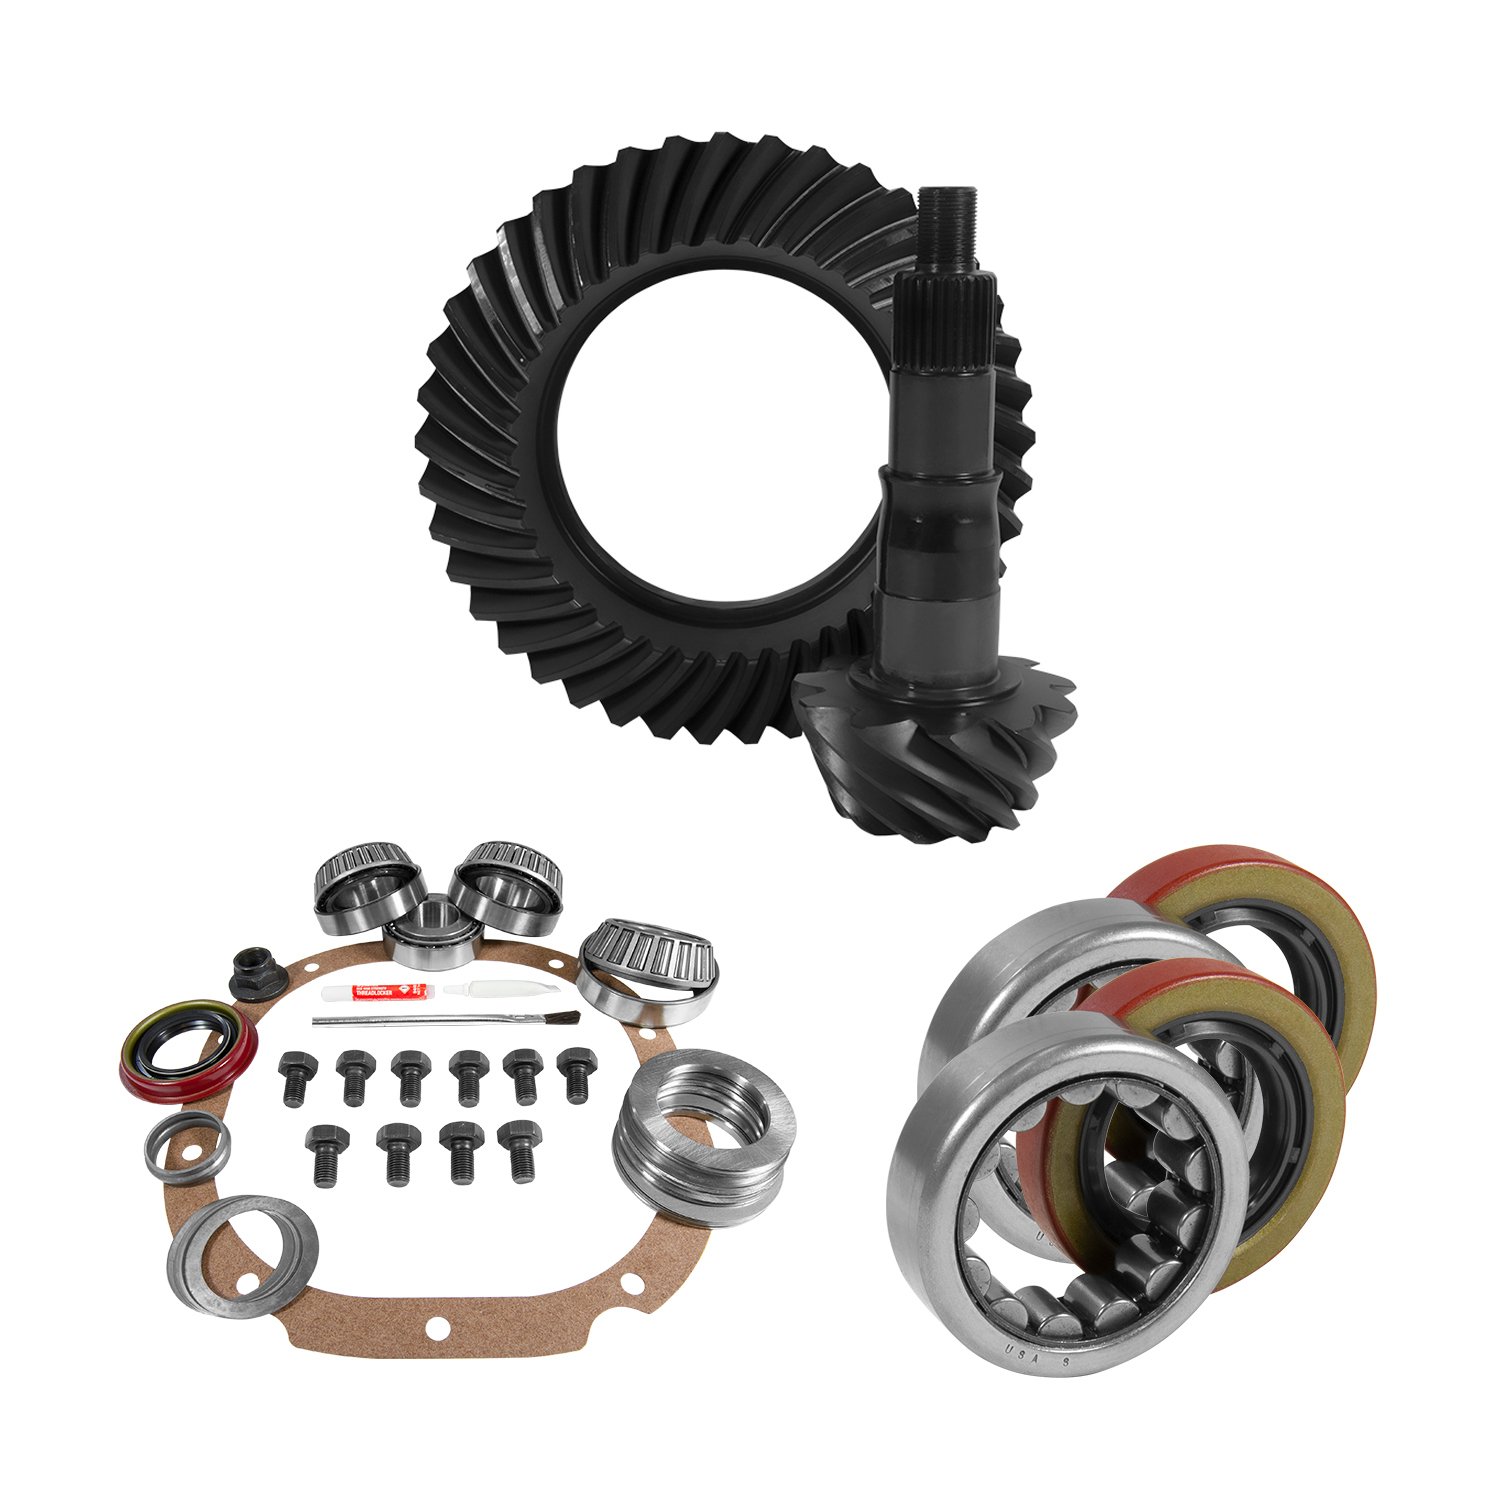 USA Standard 10672 8.8 in. Ford 3.55 Rear Ring & Pinion Install Kit, 2.25 in. Od Axle Bearings & Seals